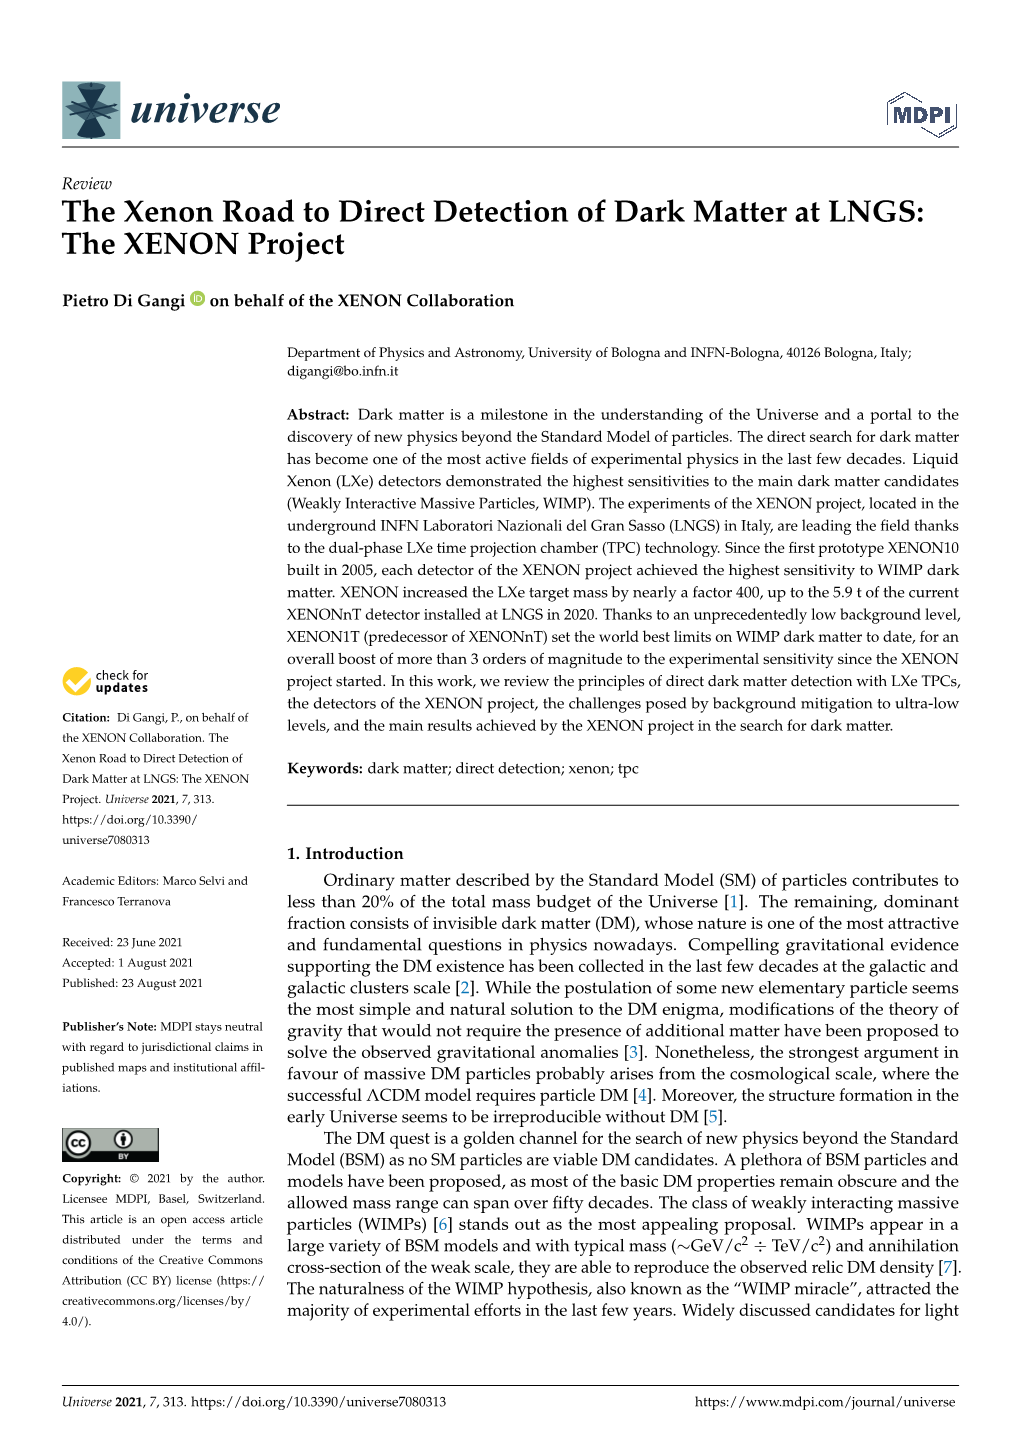 The Xenon Road to Direct Detection of Dark Matter at LNGS: the XENON Project